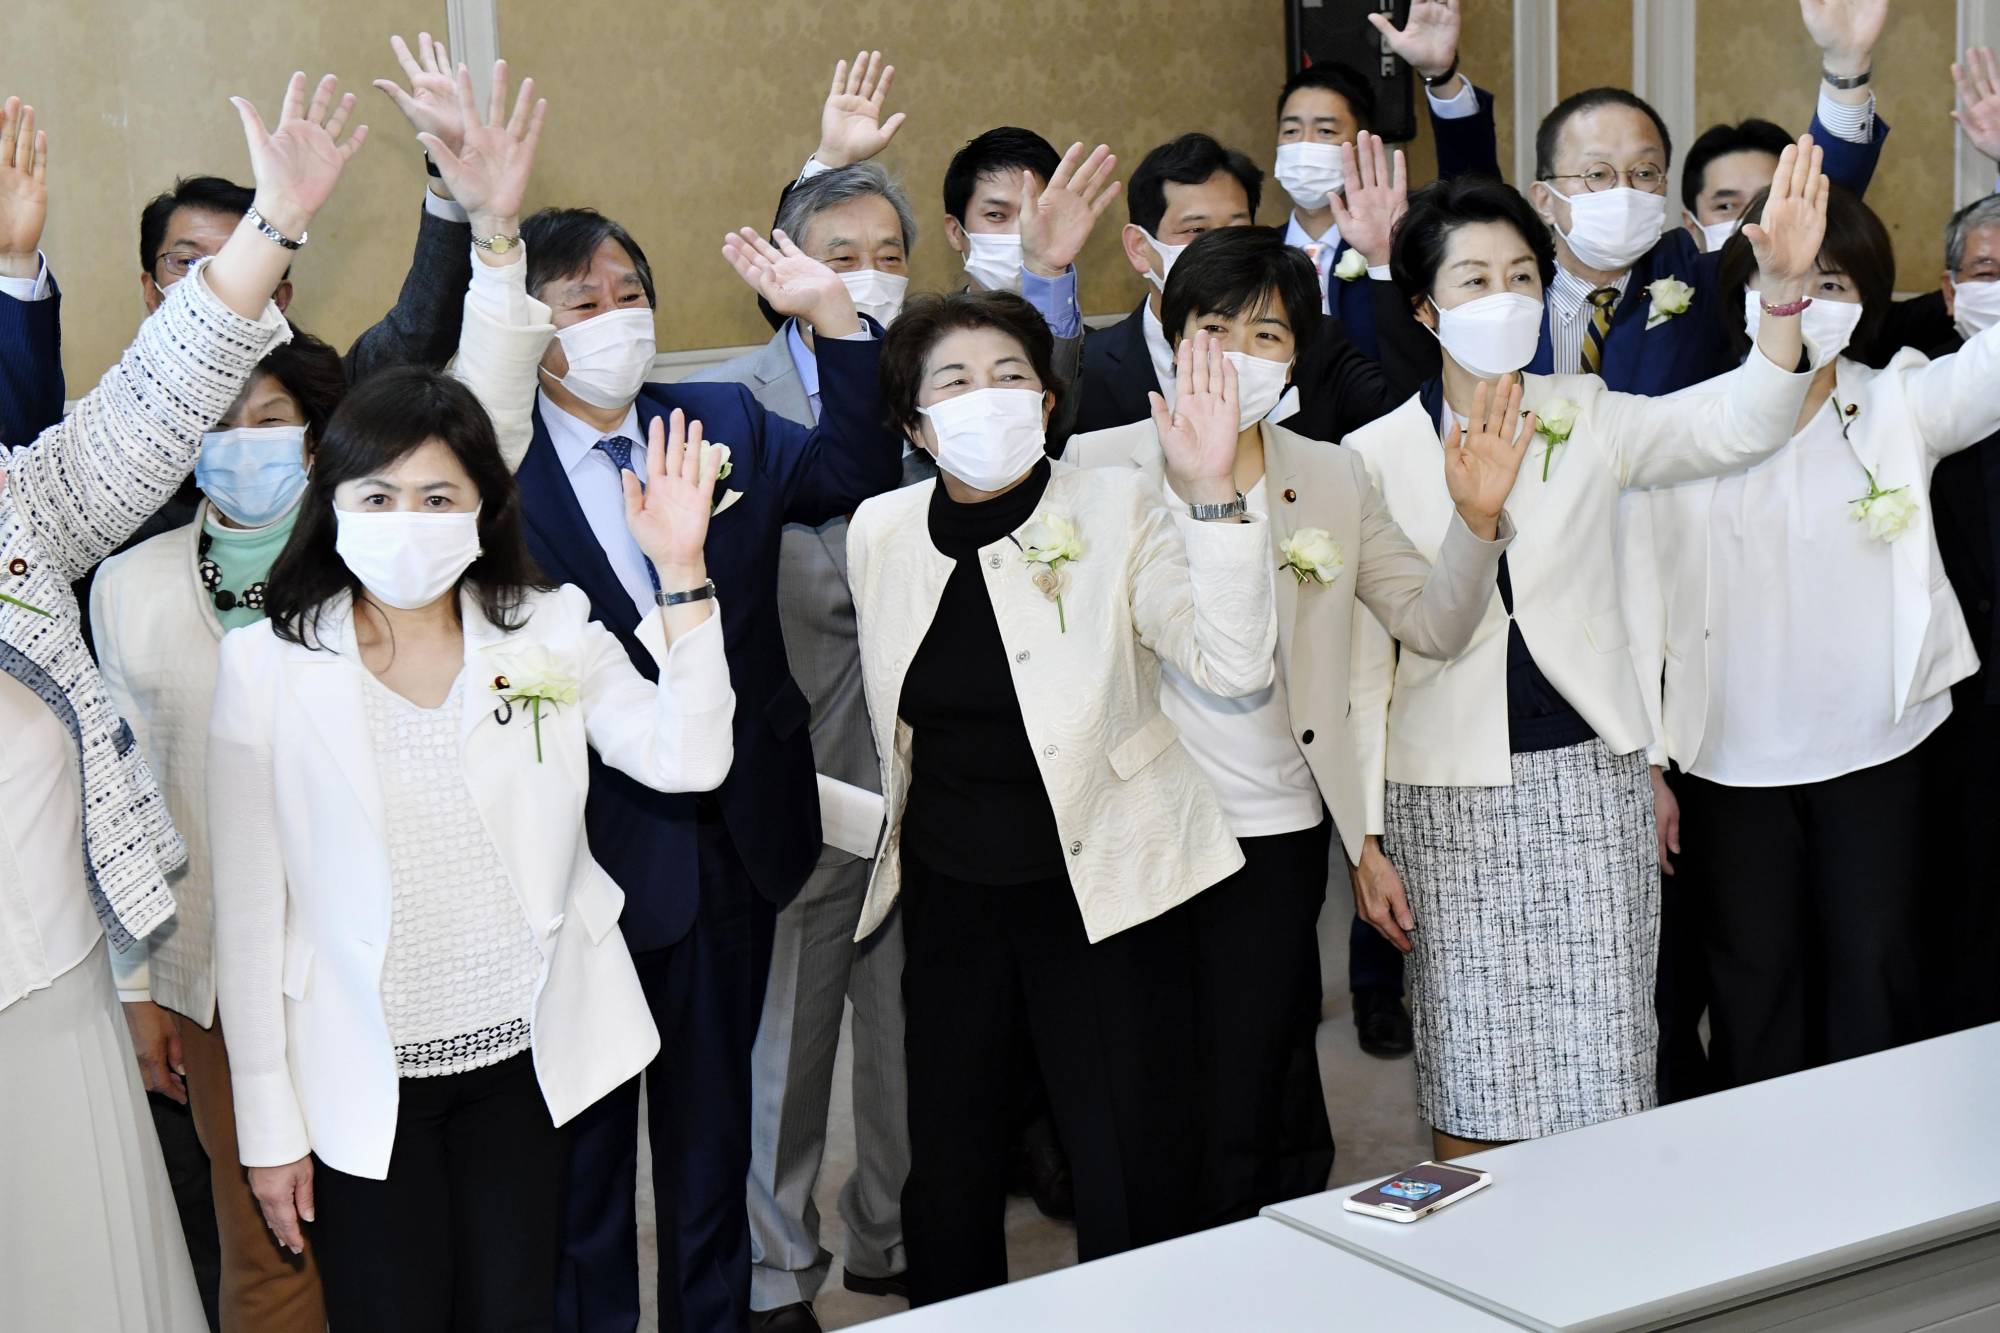 Female opposition lawmakers wear white jackets at the Diet on Tuesday in a show of protest against Tokyo Olympic organizing committee chief Yoshiro Mori's recent sexist comments. | KYODO